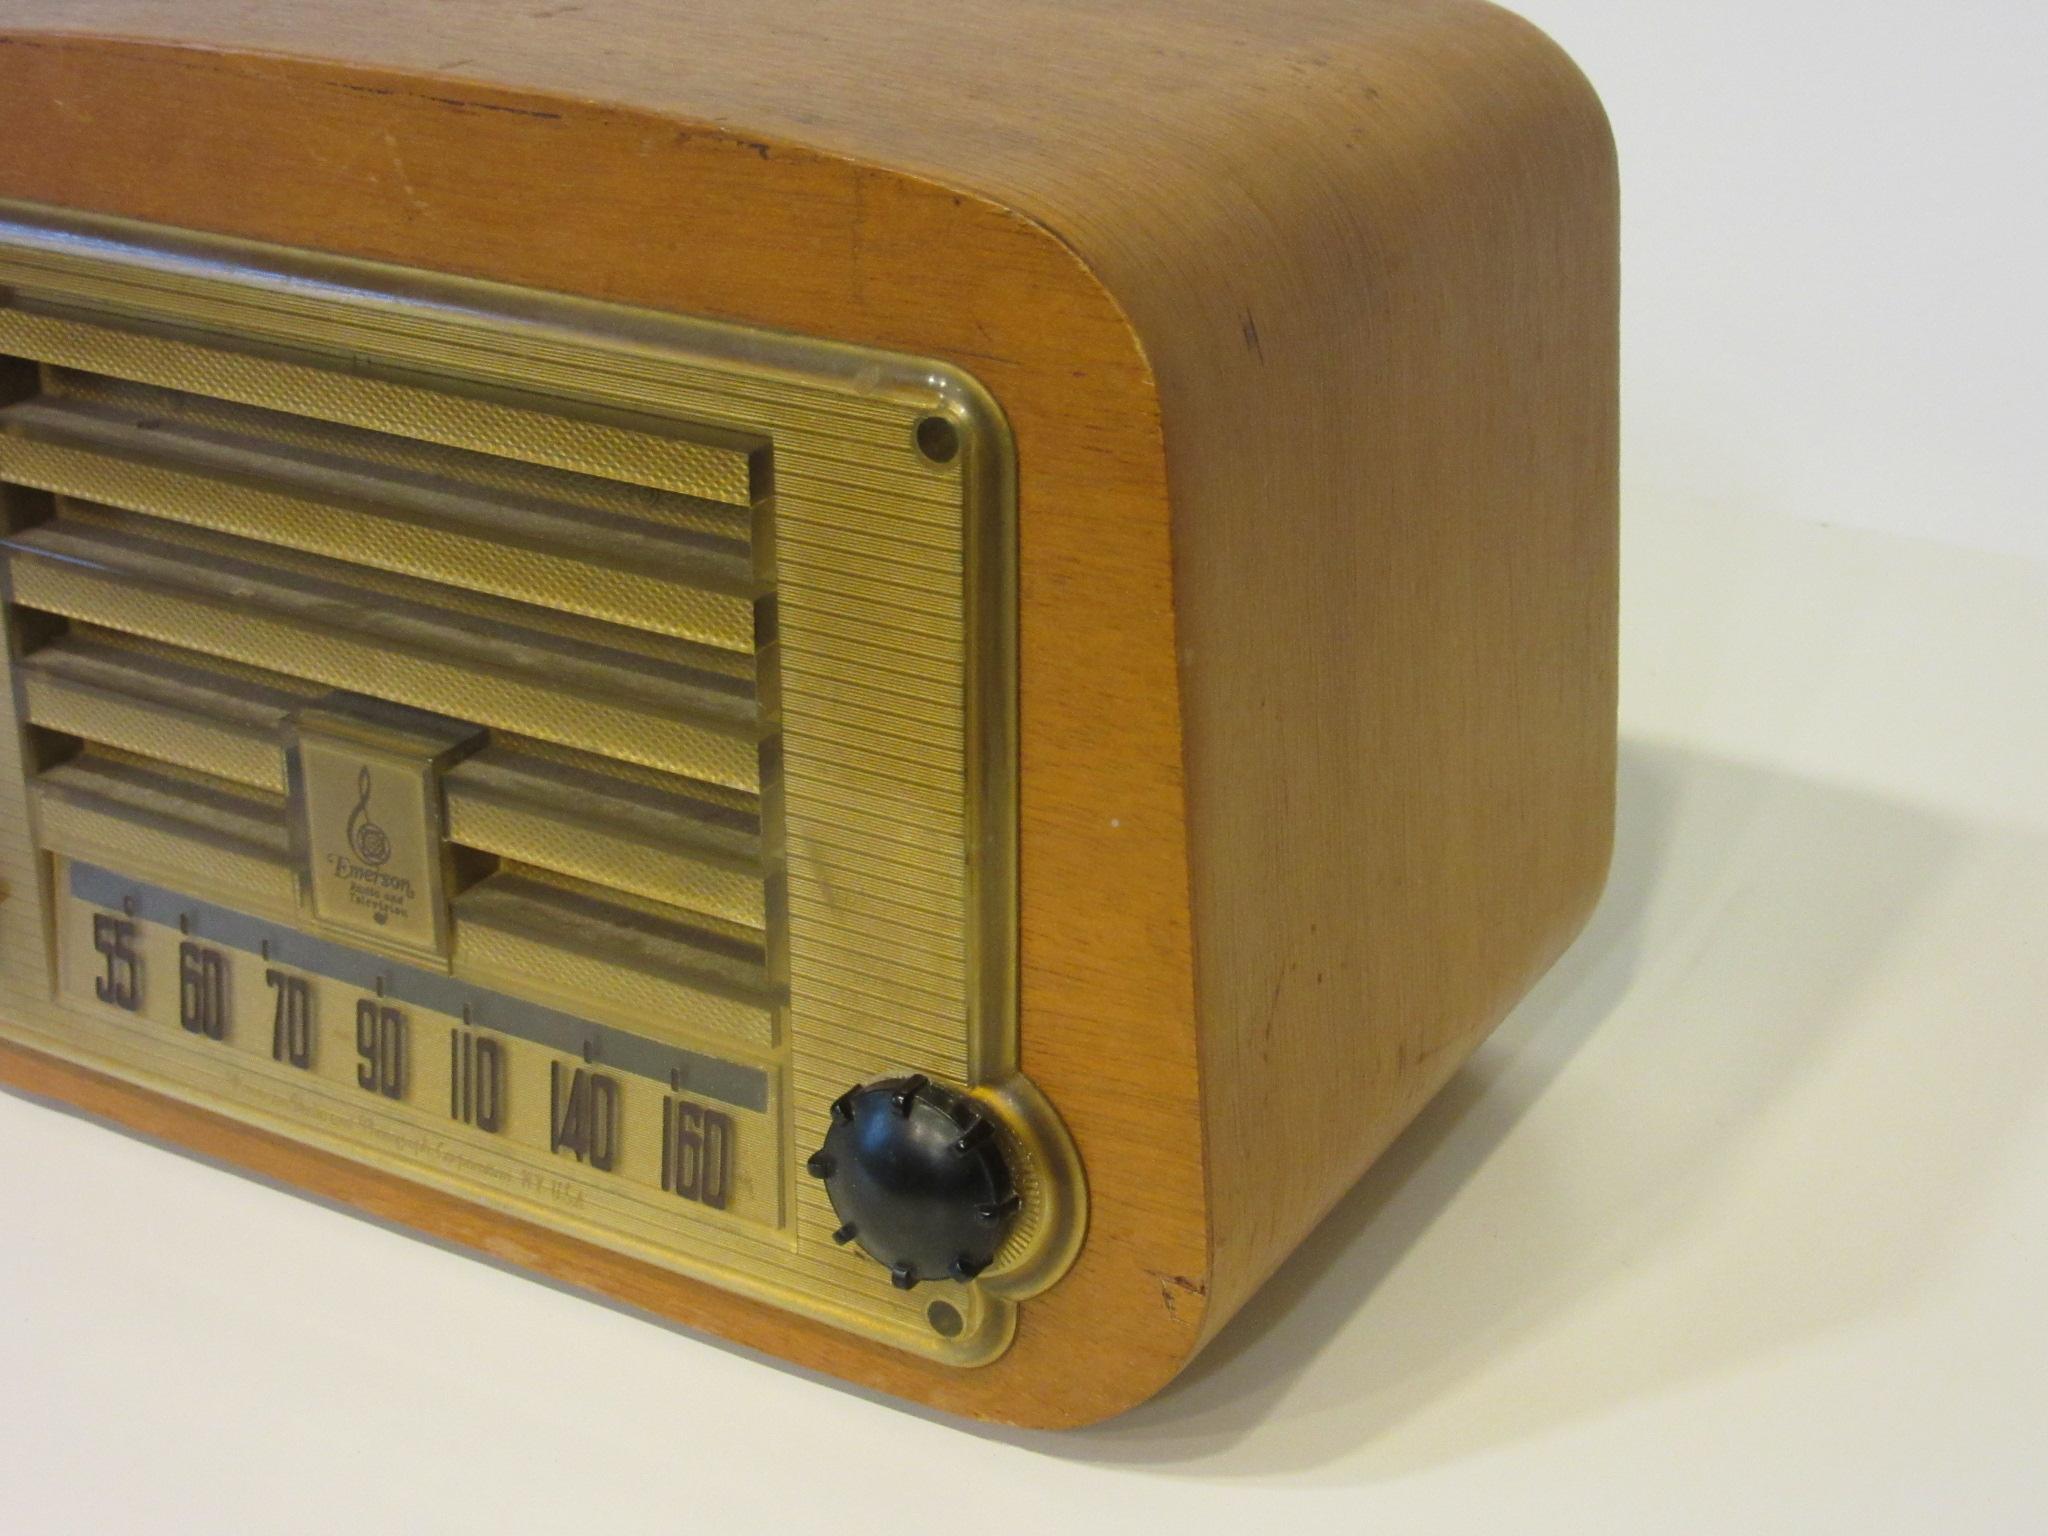 A Emerson AM radio with case designed by Charles and Ray Eames using their bent molded plywood technique discovered during the war years. The cases were constructed by the Evans Products Company with the radio internals made by the Emerson Radio and